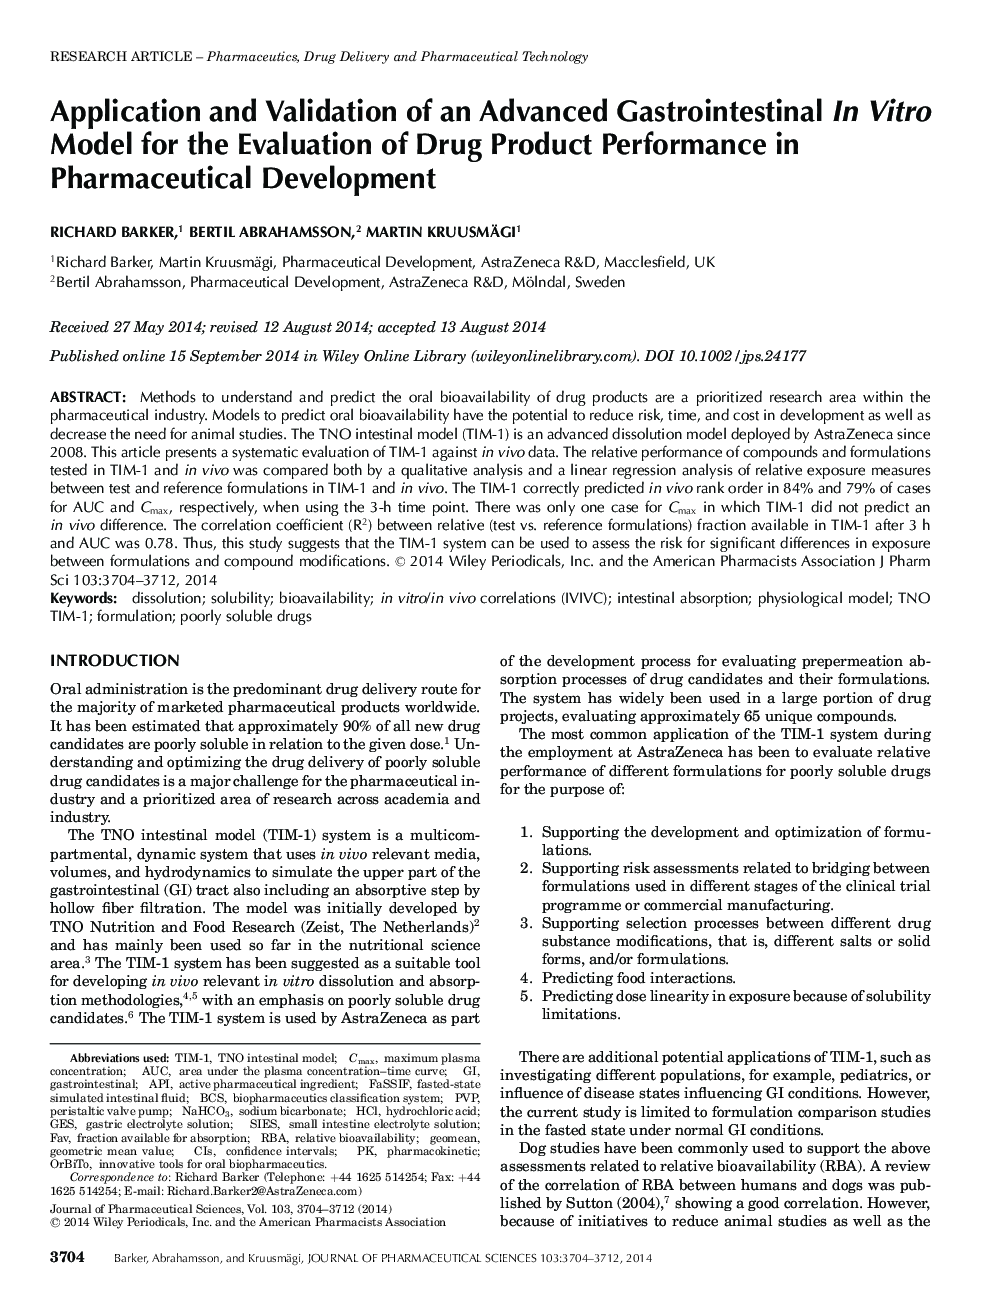 Application and Validation of an Advanced Gastrointestinal In Vitro Model for the Evaluation of Drug Product Performance in Pharmaceutical Development